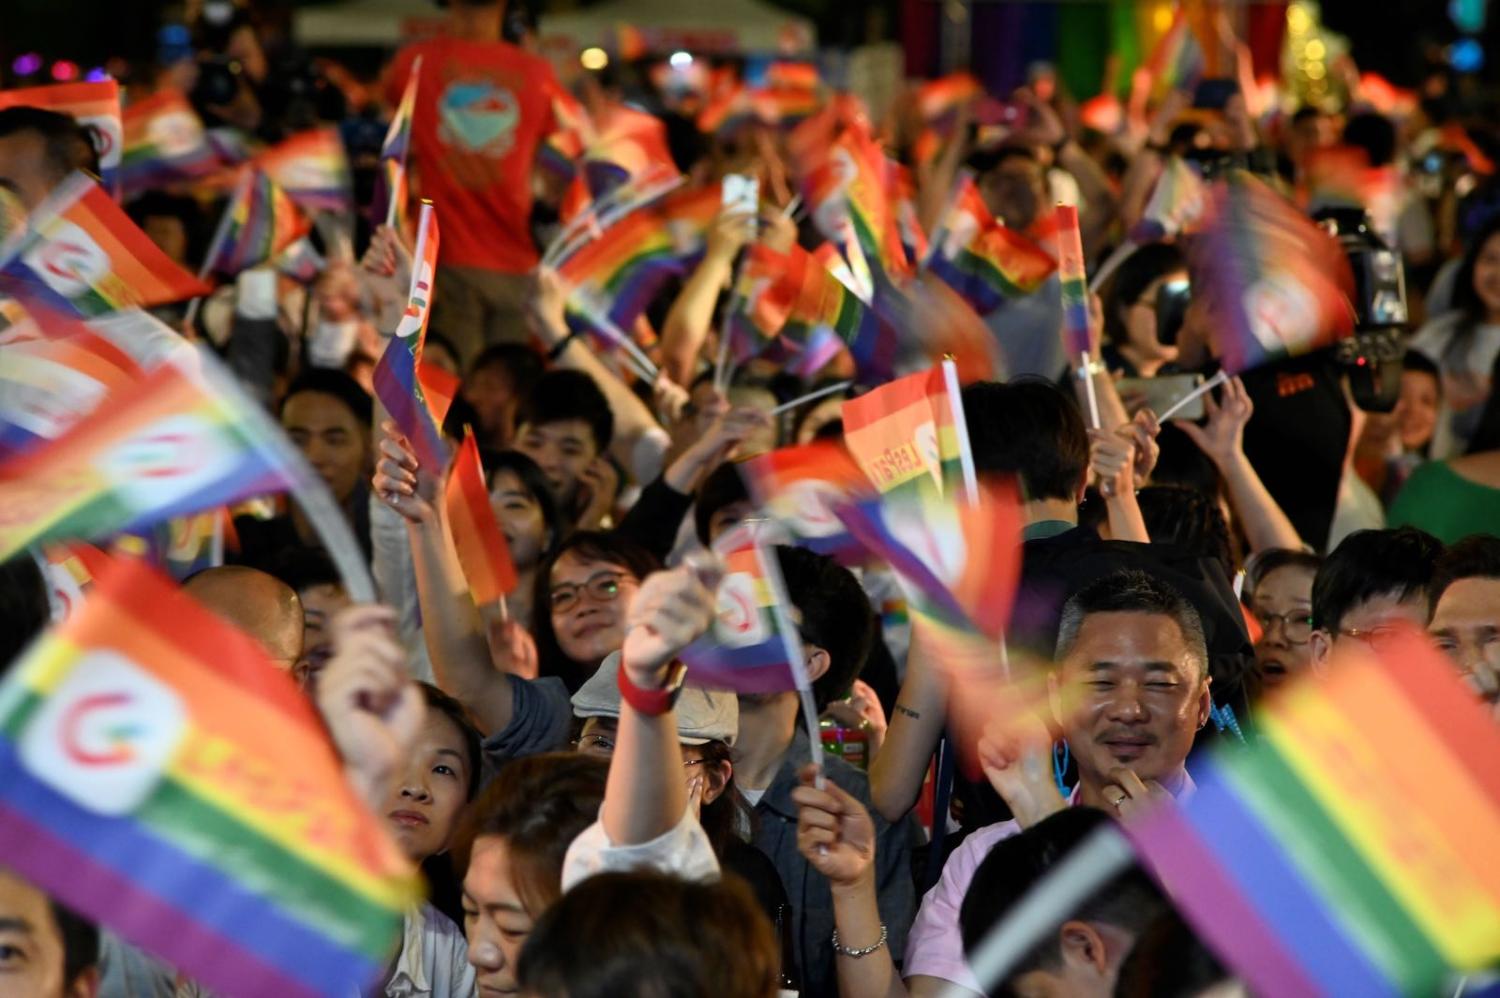 Rainbow flags during a mass wedding banquet for gay couples in front of the Presidential Palace in Taipei on 25 May (Photo: Sam Yeh via Getty)